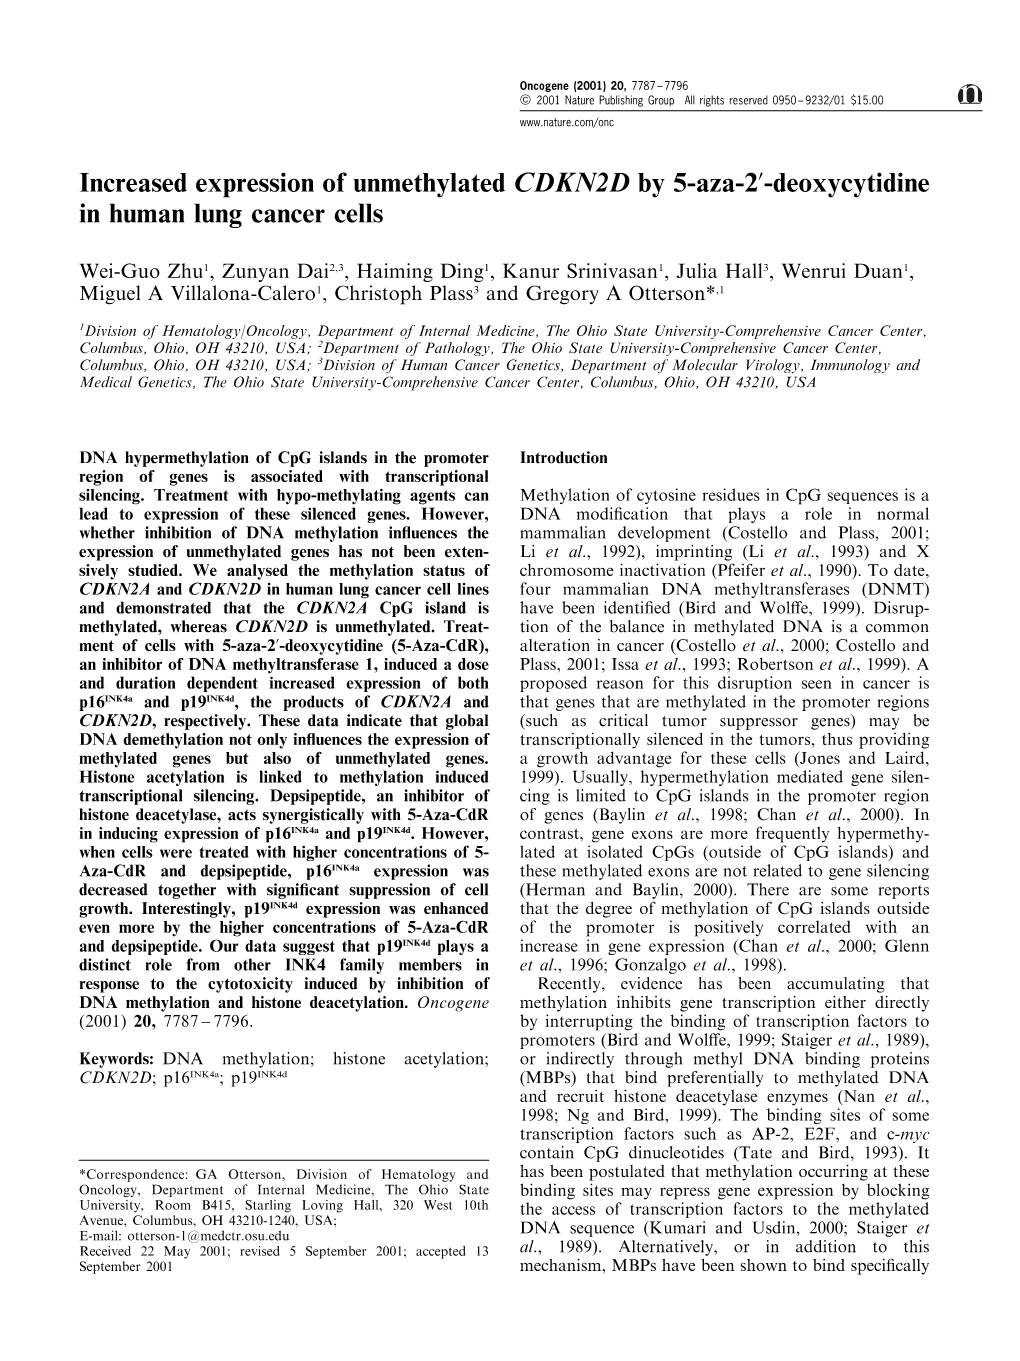 Increased Expression of Unmethylated CDKN2D by 5-Aza-2'-Deoxycytidine in Human Lung Cancer Cells